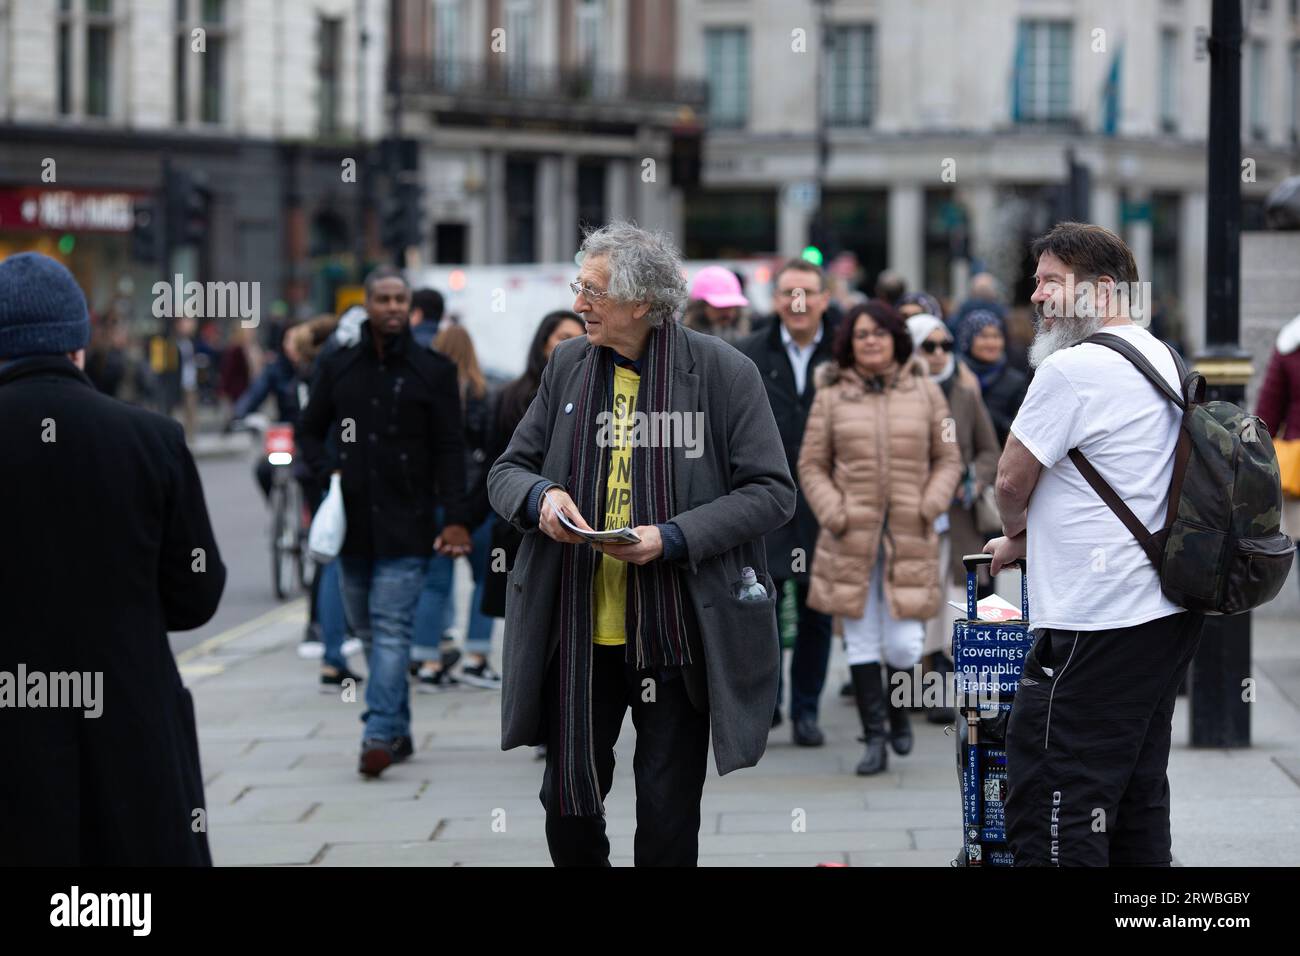 Piers Corbyn, brother of Jeremy Corbyn MP, is seen during a protest against the expansion of London's ultra-low emission zone (ULEZ) in London. Stock Photo